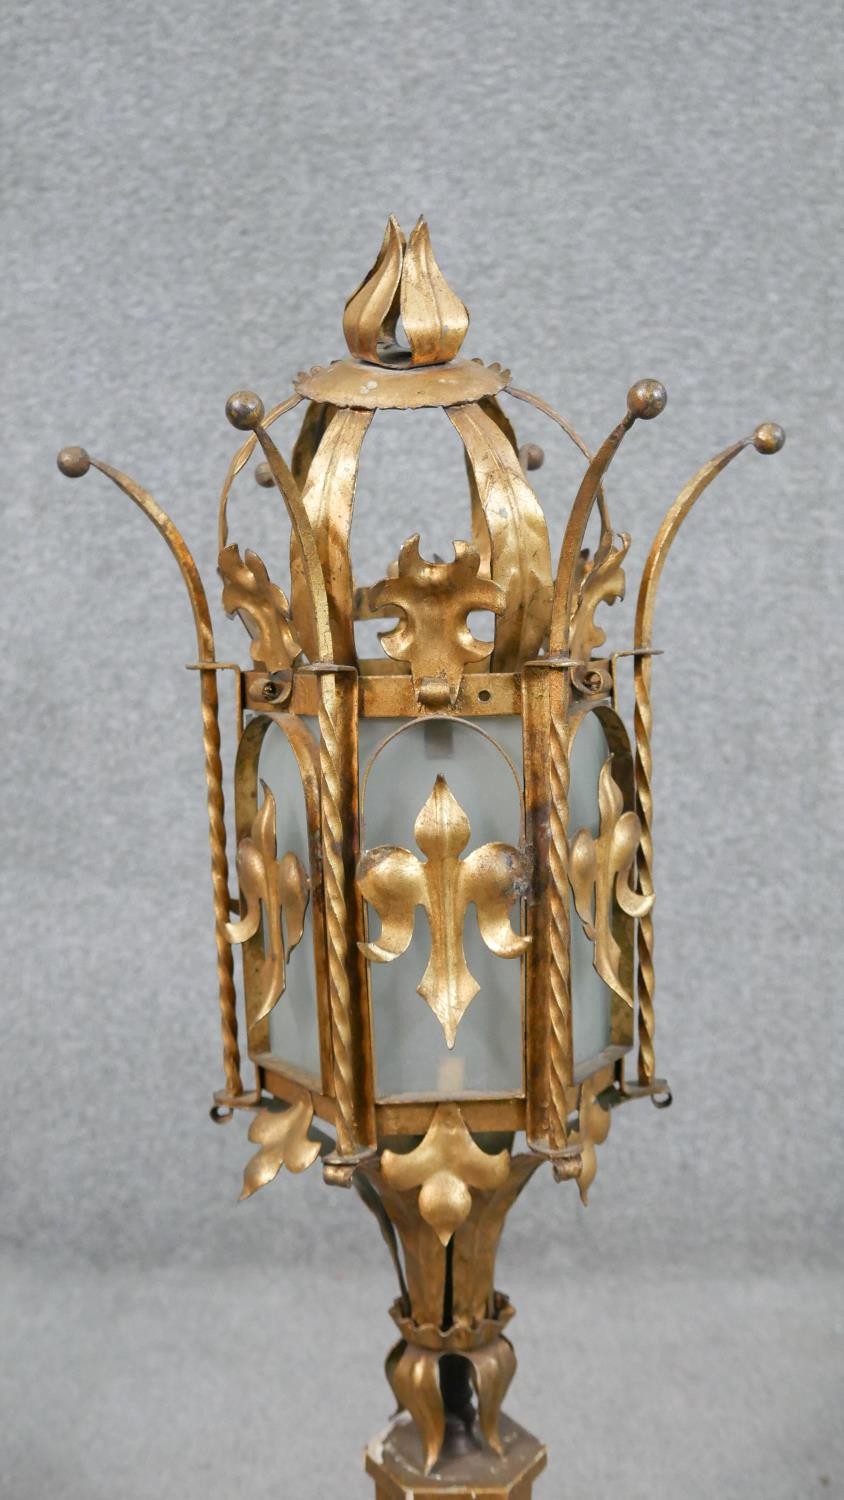 A pair of gilt metal lamps, believed to be Venetian gondola lanterns, of hexagonal section with - Image 4 of 7